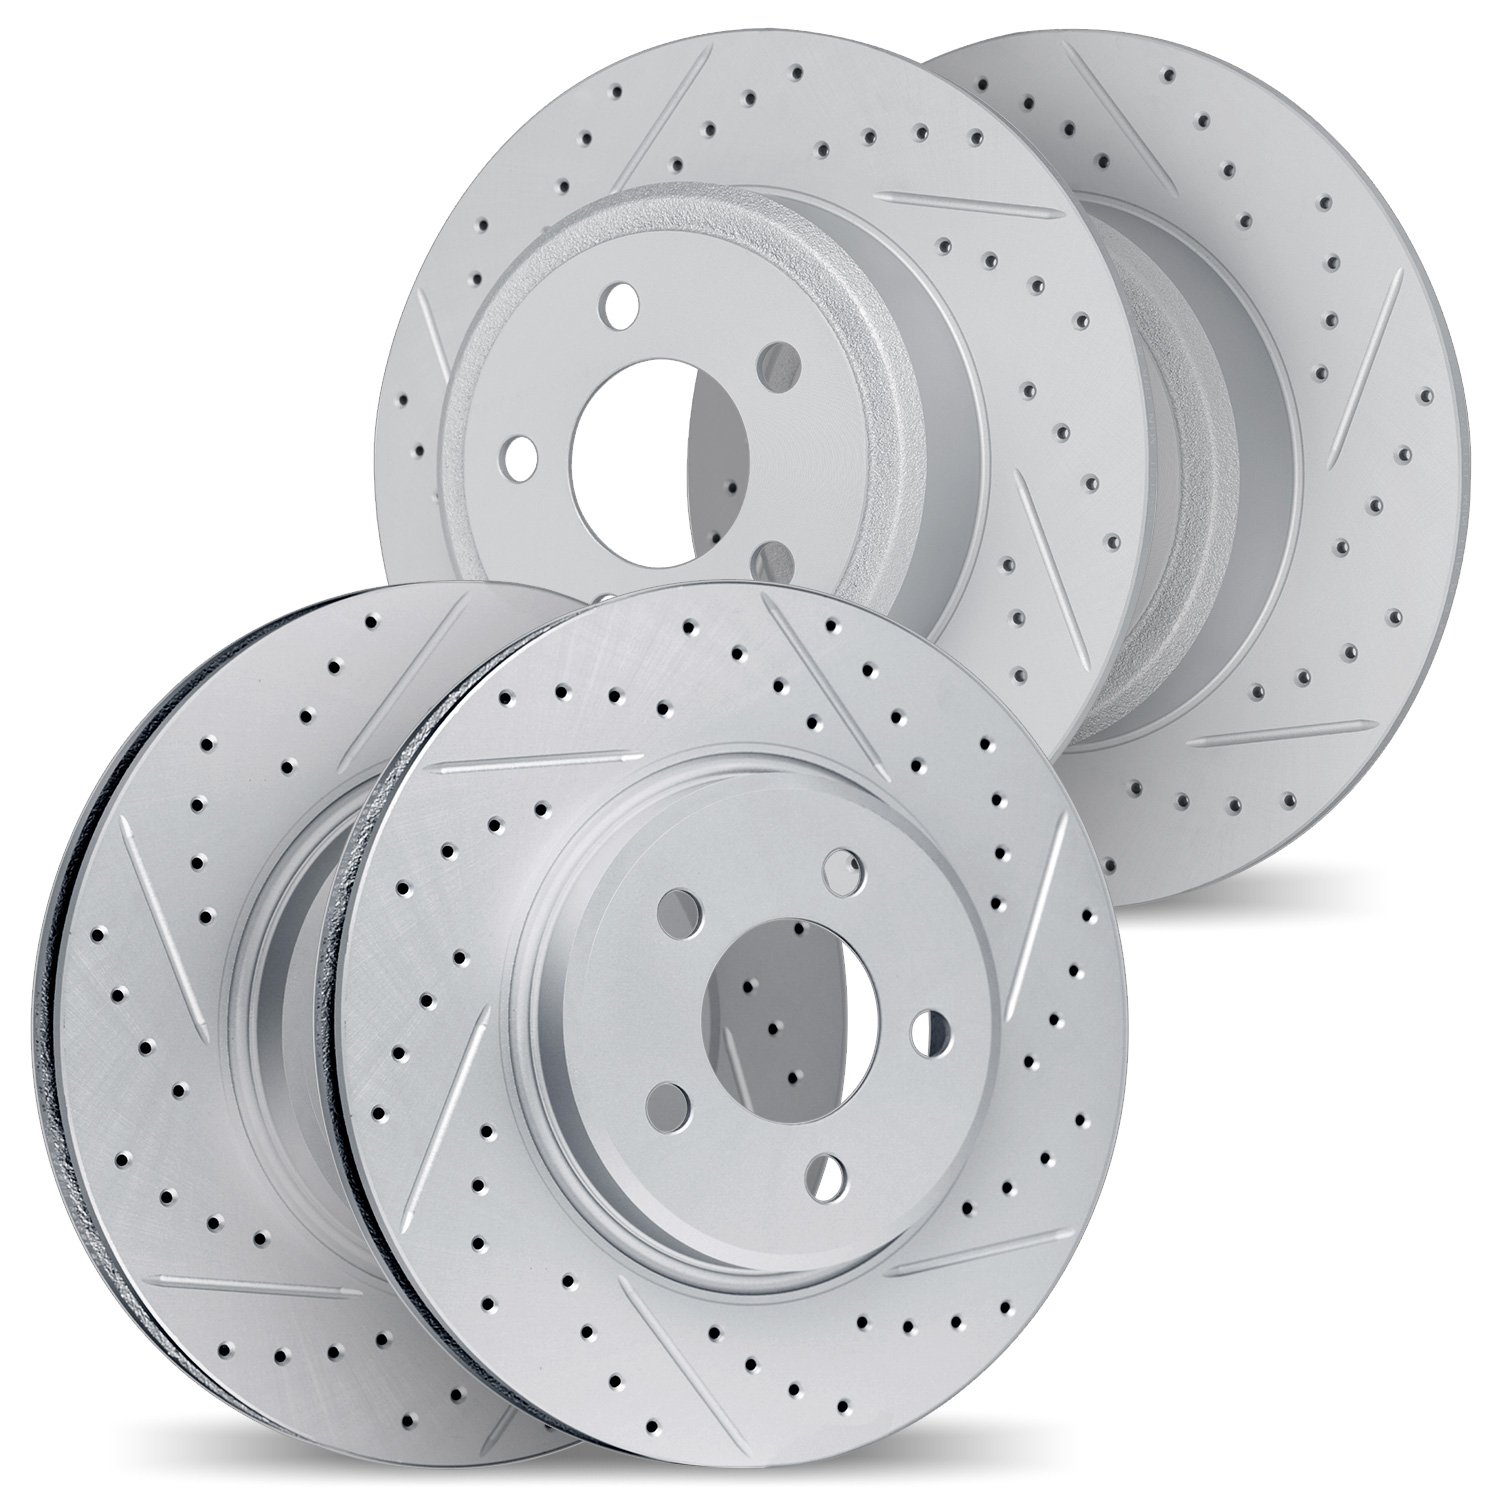 2004-54069 Geoperformance Drilled/Slotted Brake Rotors, 2002-2005 Ford/Lincoln/Mercury/Mazda, Position: Front and Rear